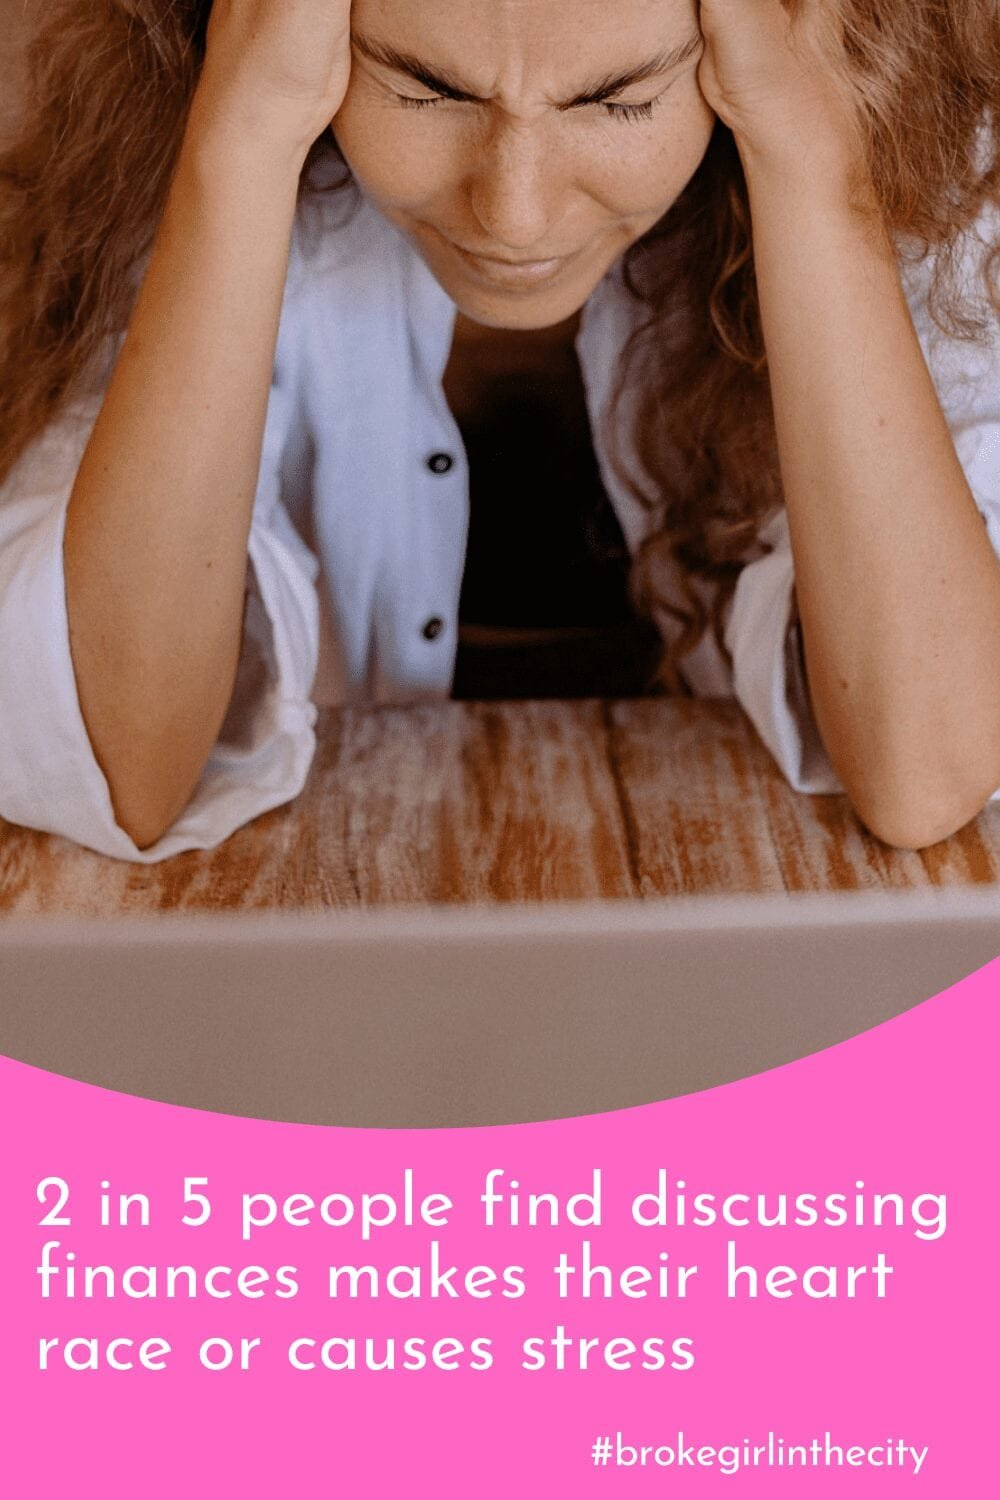 2 in 5 people find discussing finances leads to stress